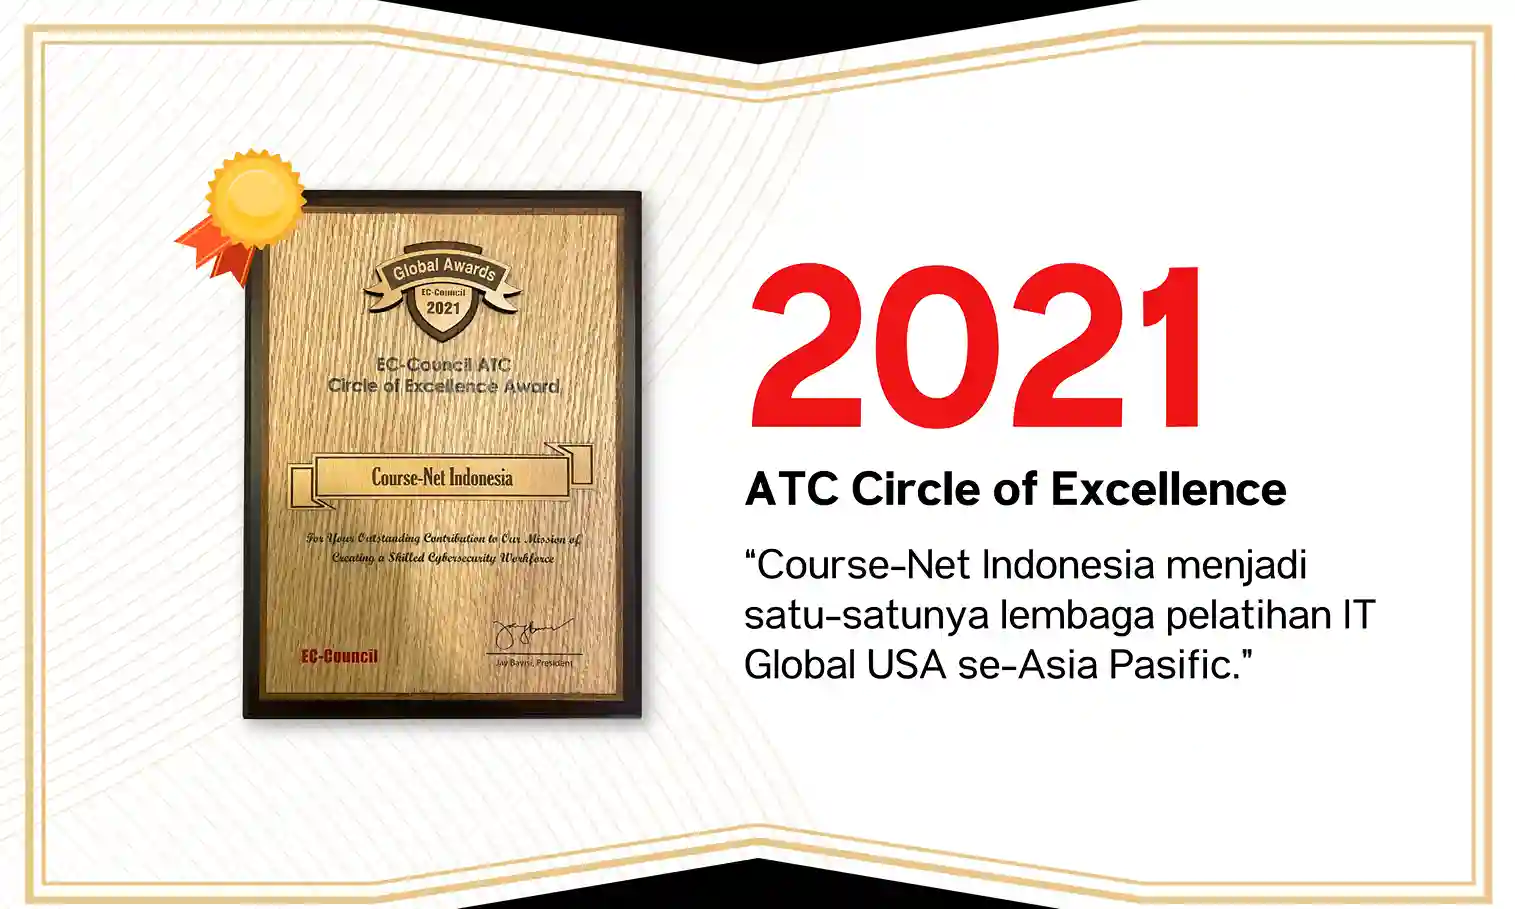 2021 ATC Circle of Excellence